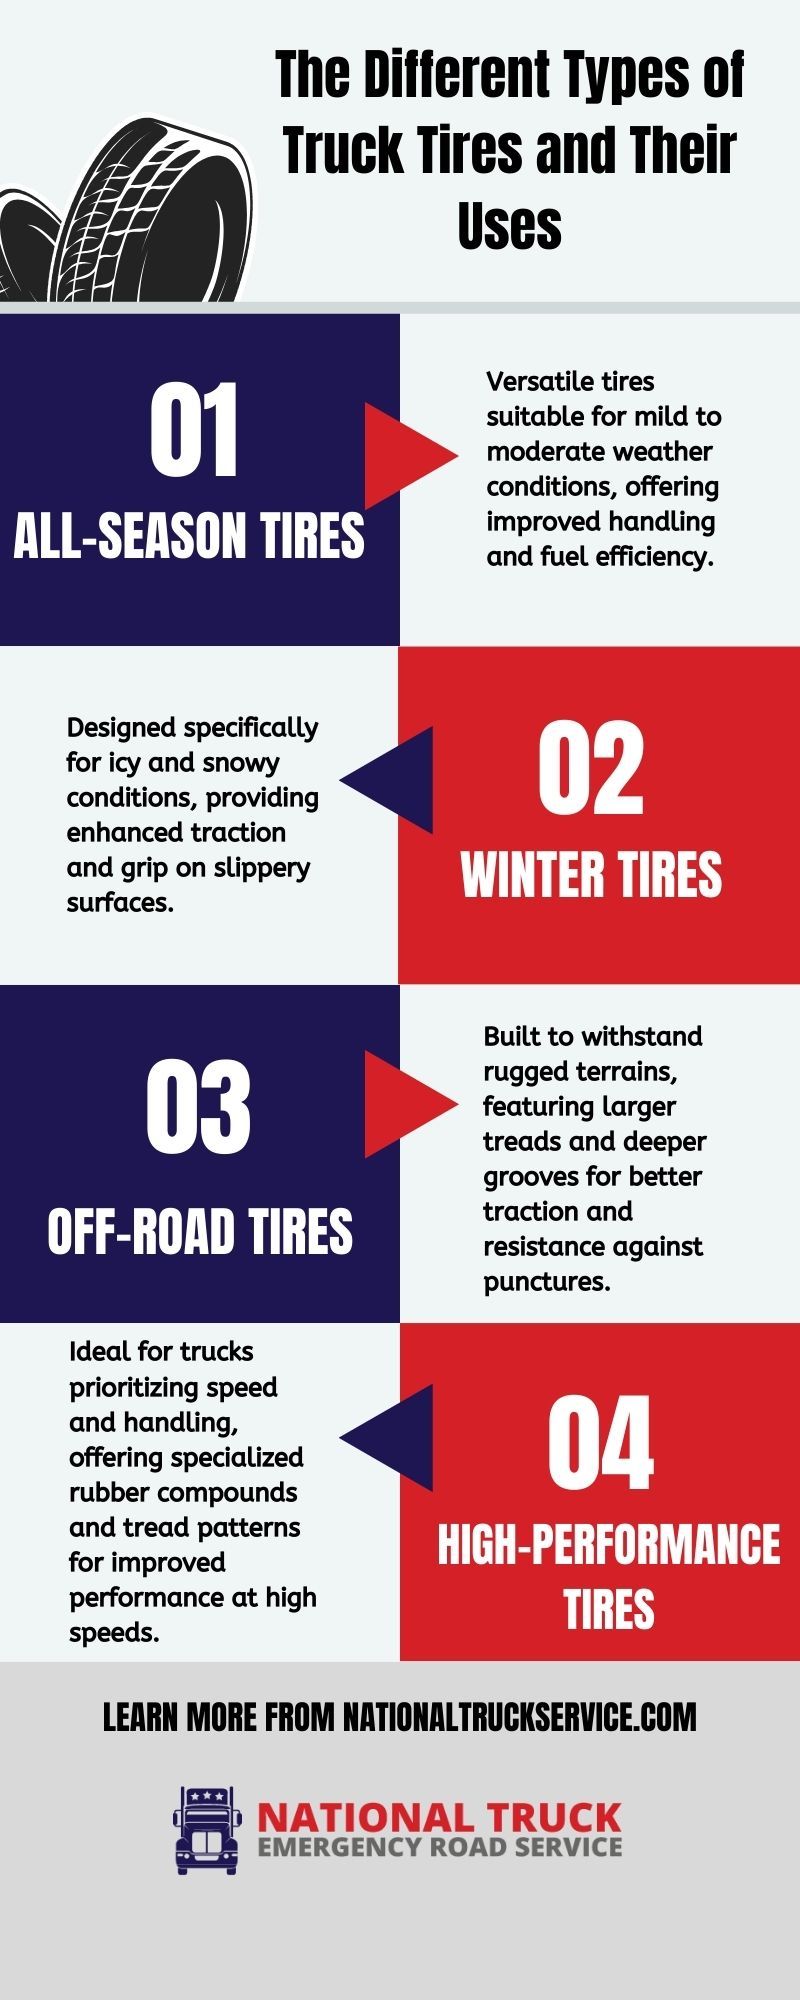 The Different Types of Truck Tires and Their Uses Infographic